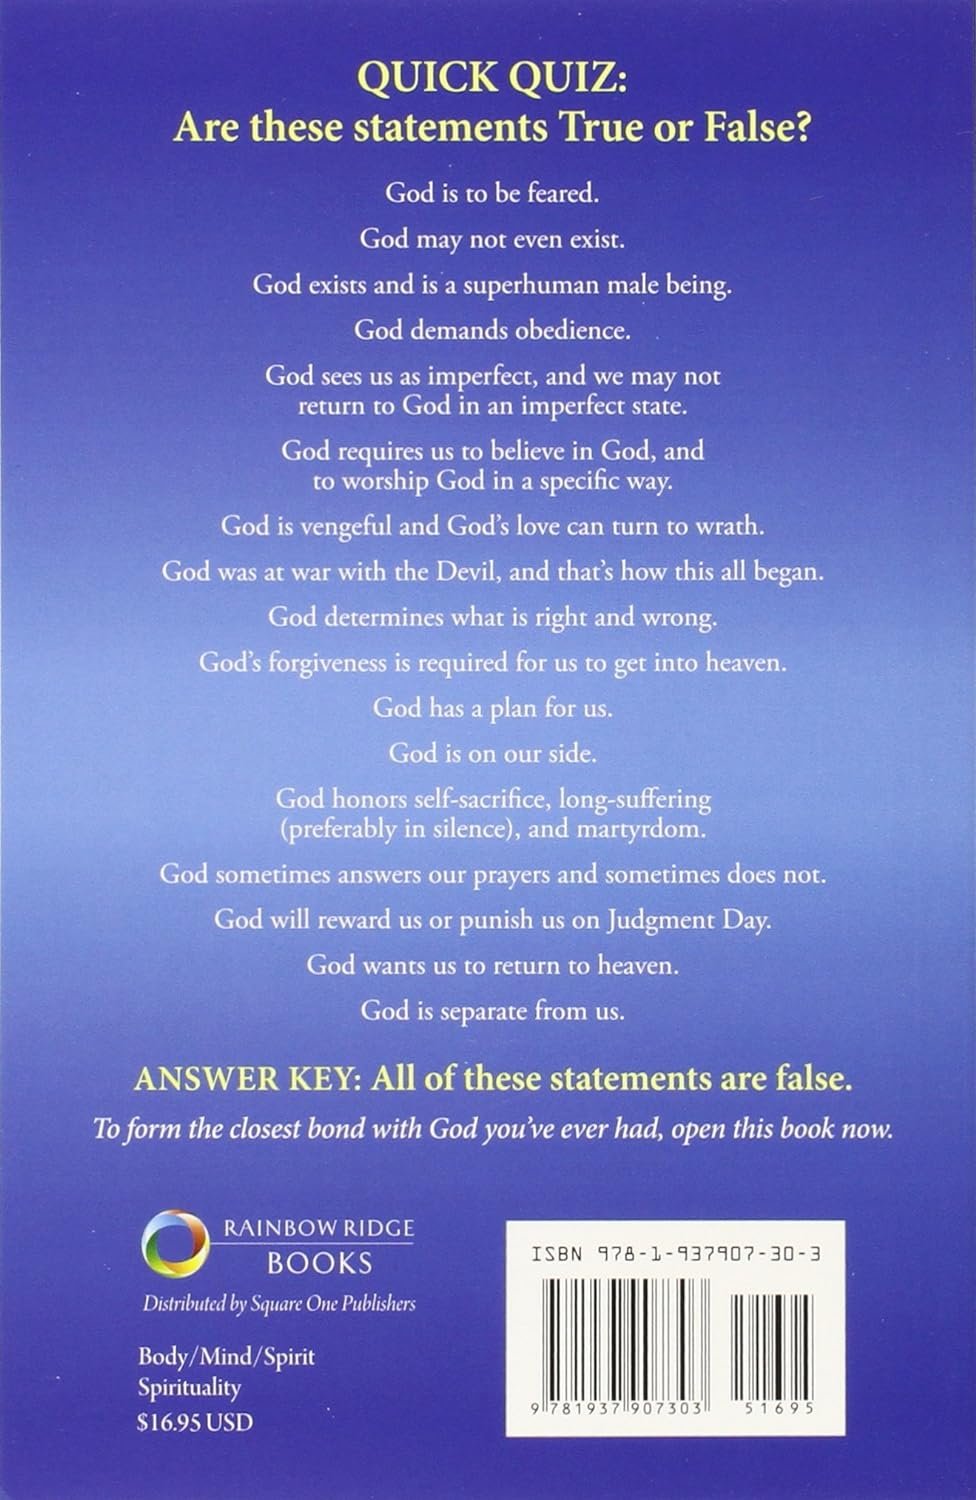 Back cover of a book titled "God's Message to the World: You've Got Me All Wrong" by Neale Donald Walsch, featuring a list of theological statements pivotal to the global spiritual revolution, with a prompt to determine their truthfulness.